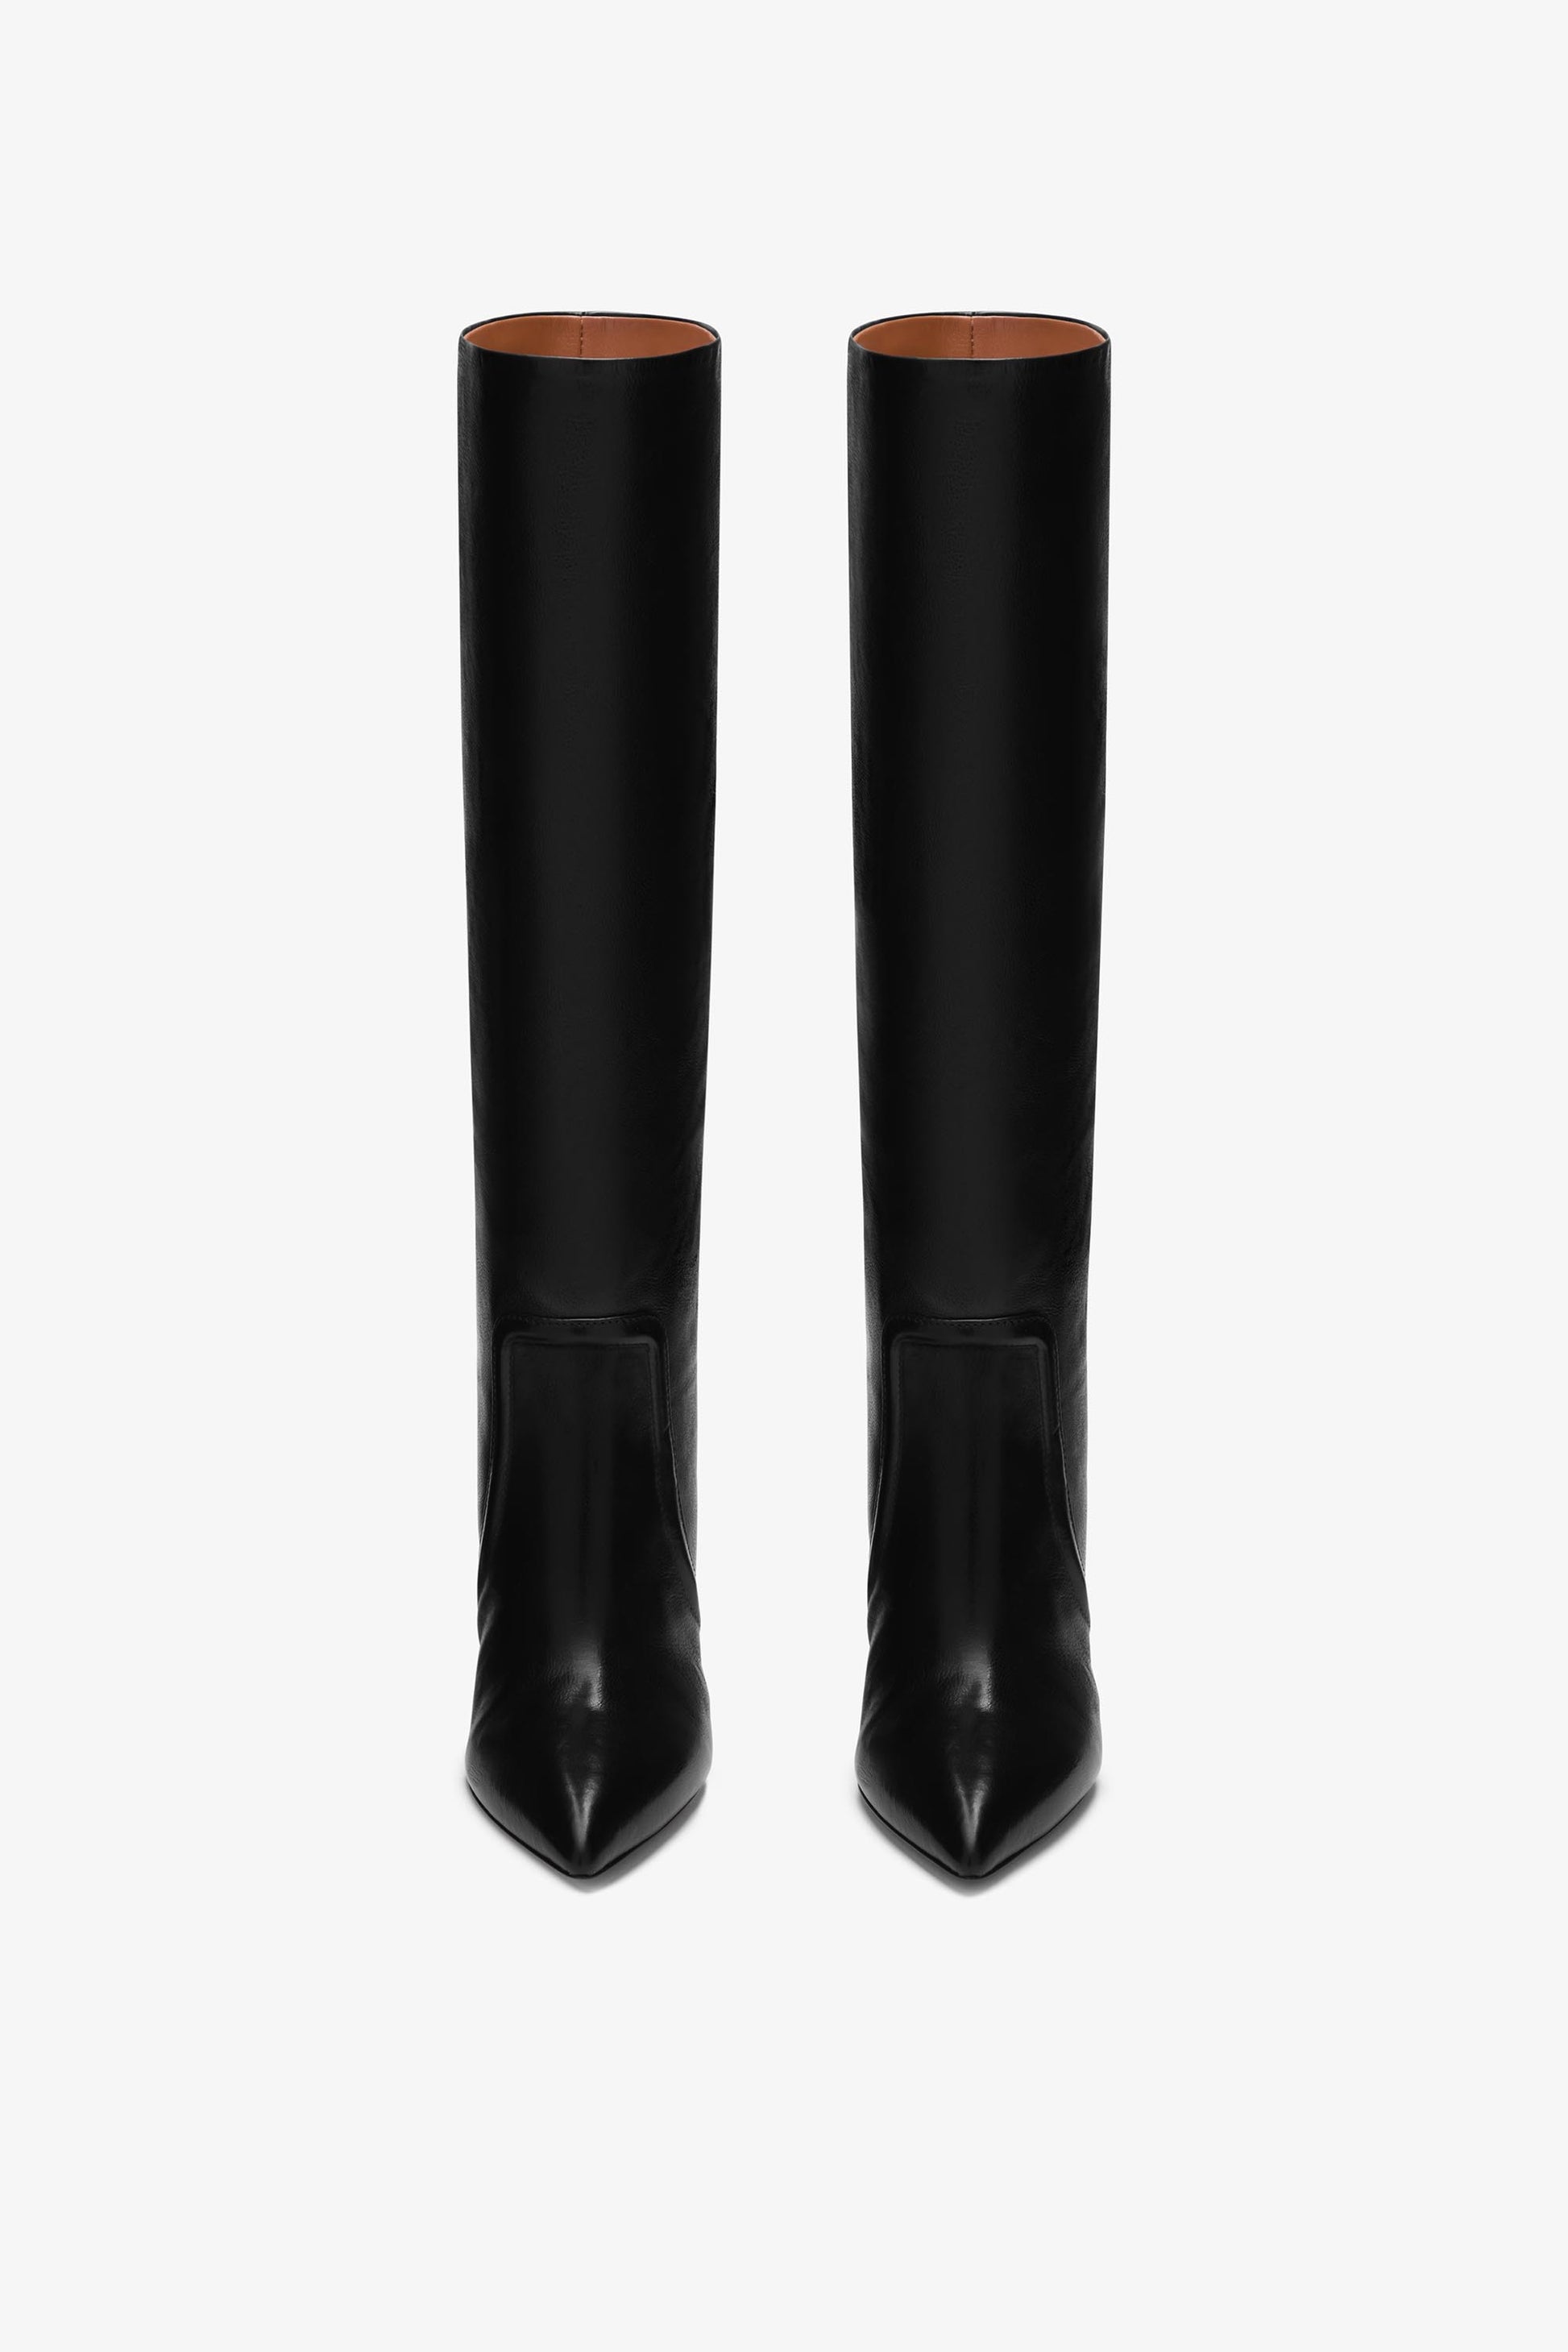 Black leather knee-high boot